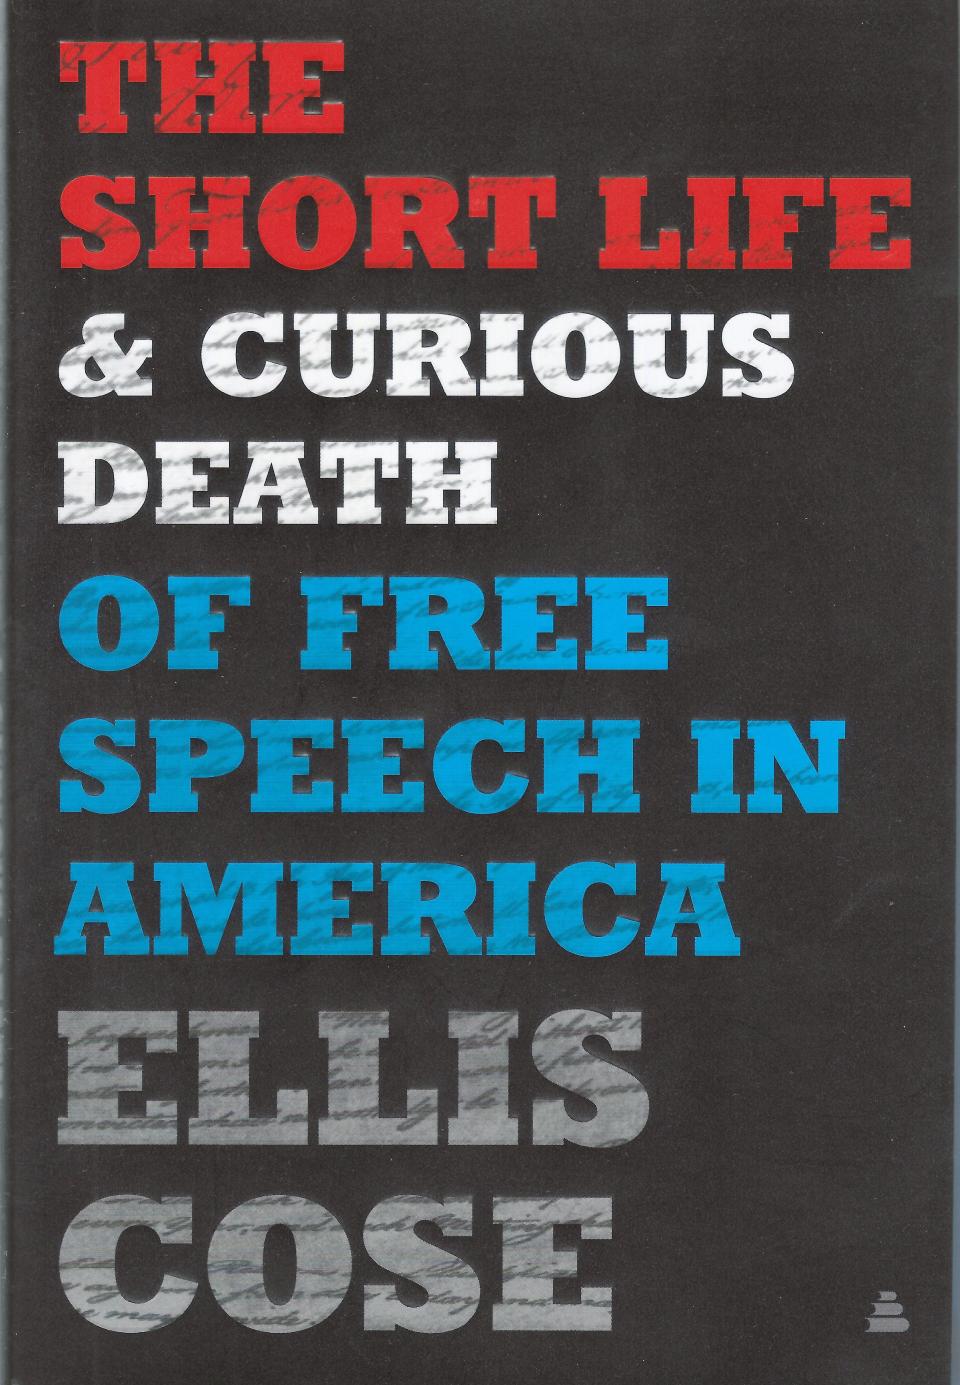 The Short Life & Curious Death of Free Speech in America, by Ellis Cose, published Sept. 15, 2020, by Amistad.